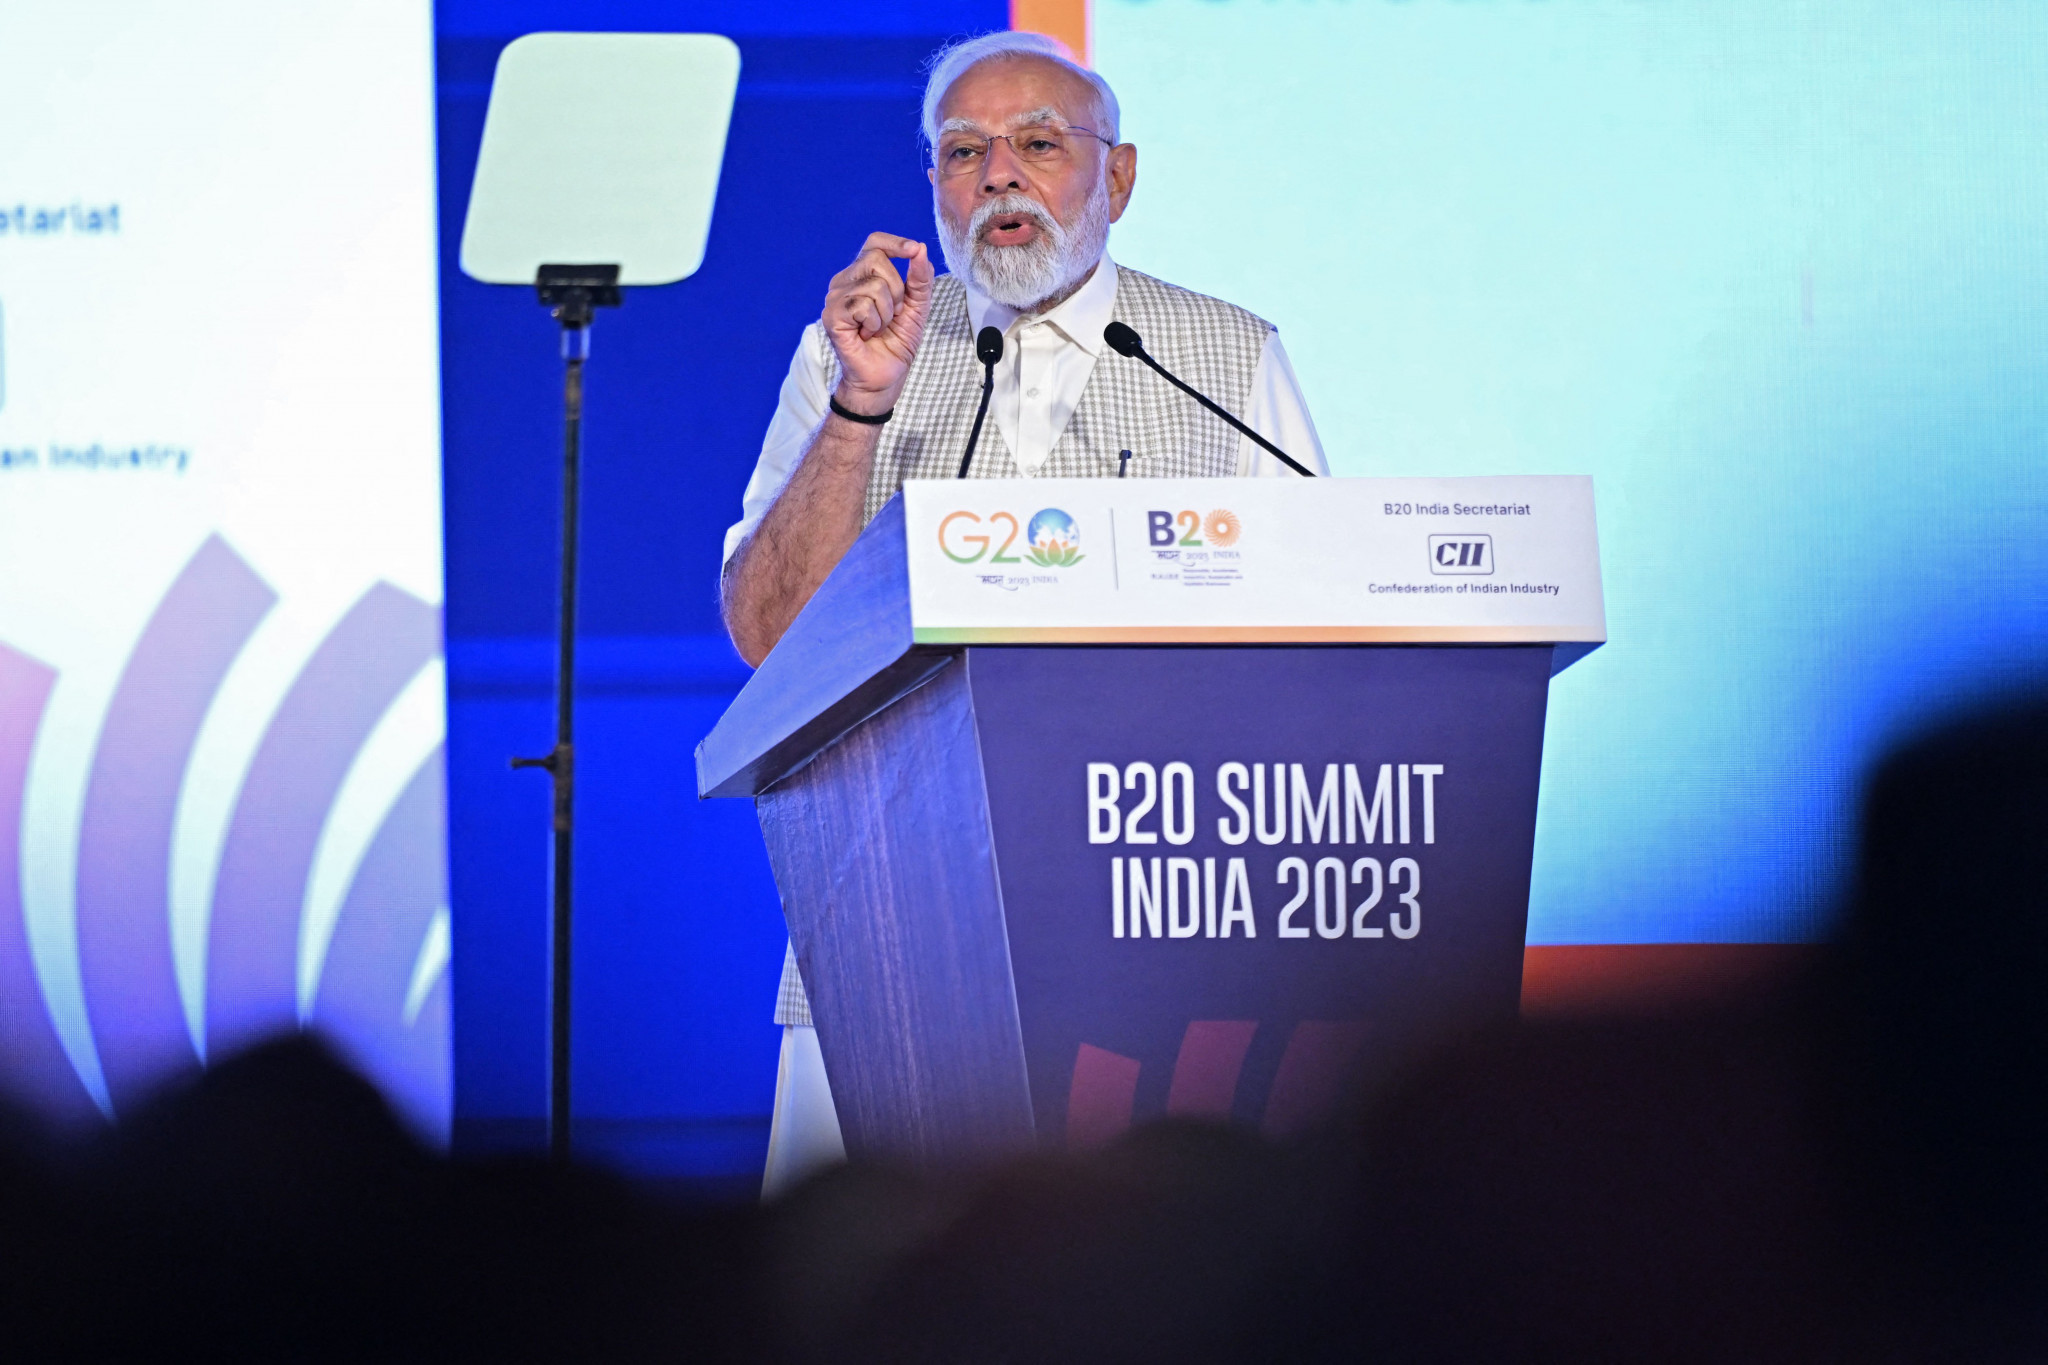 The illiberalism evident under Prime Minister Narendra Modi might be more of a negative factor as the sub-continent hopes to host the Olympics in 2036 ©Getty Images